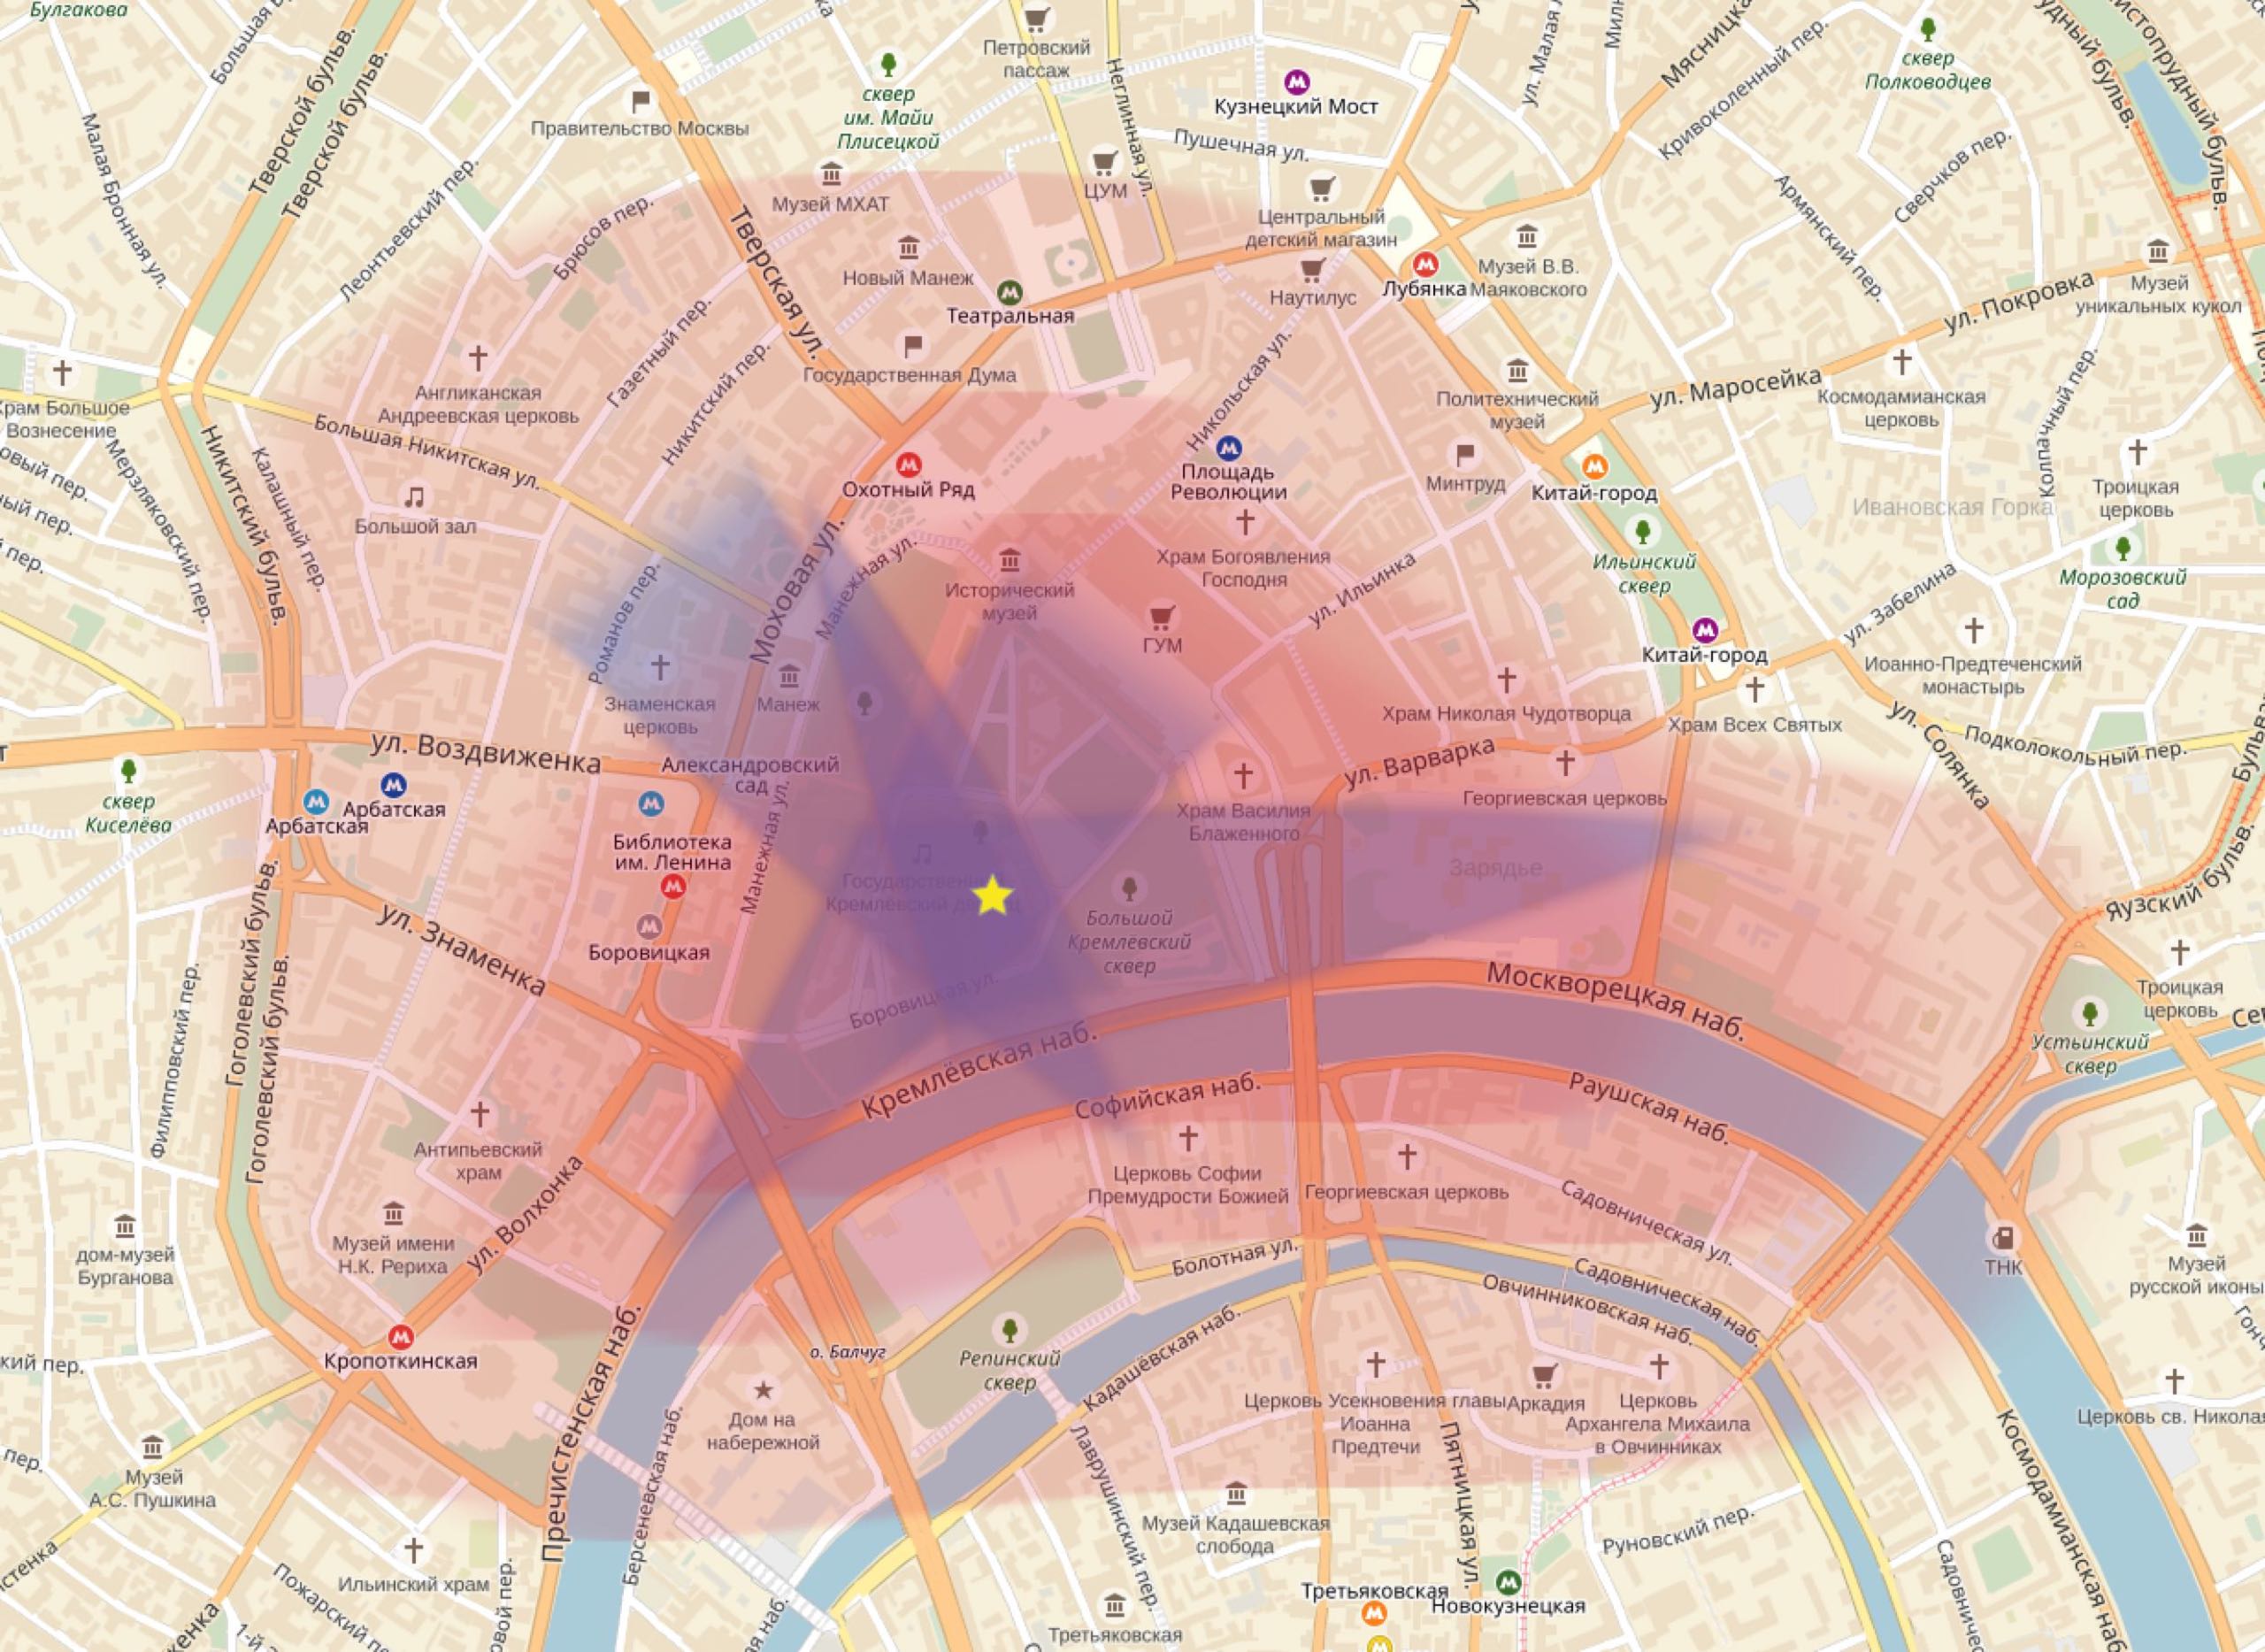 GPS jammer map of Moscow